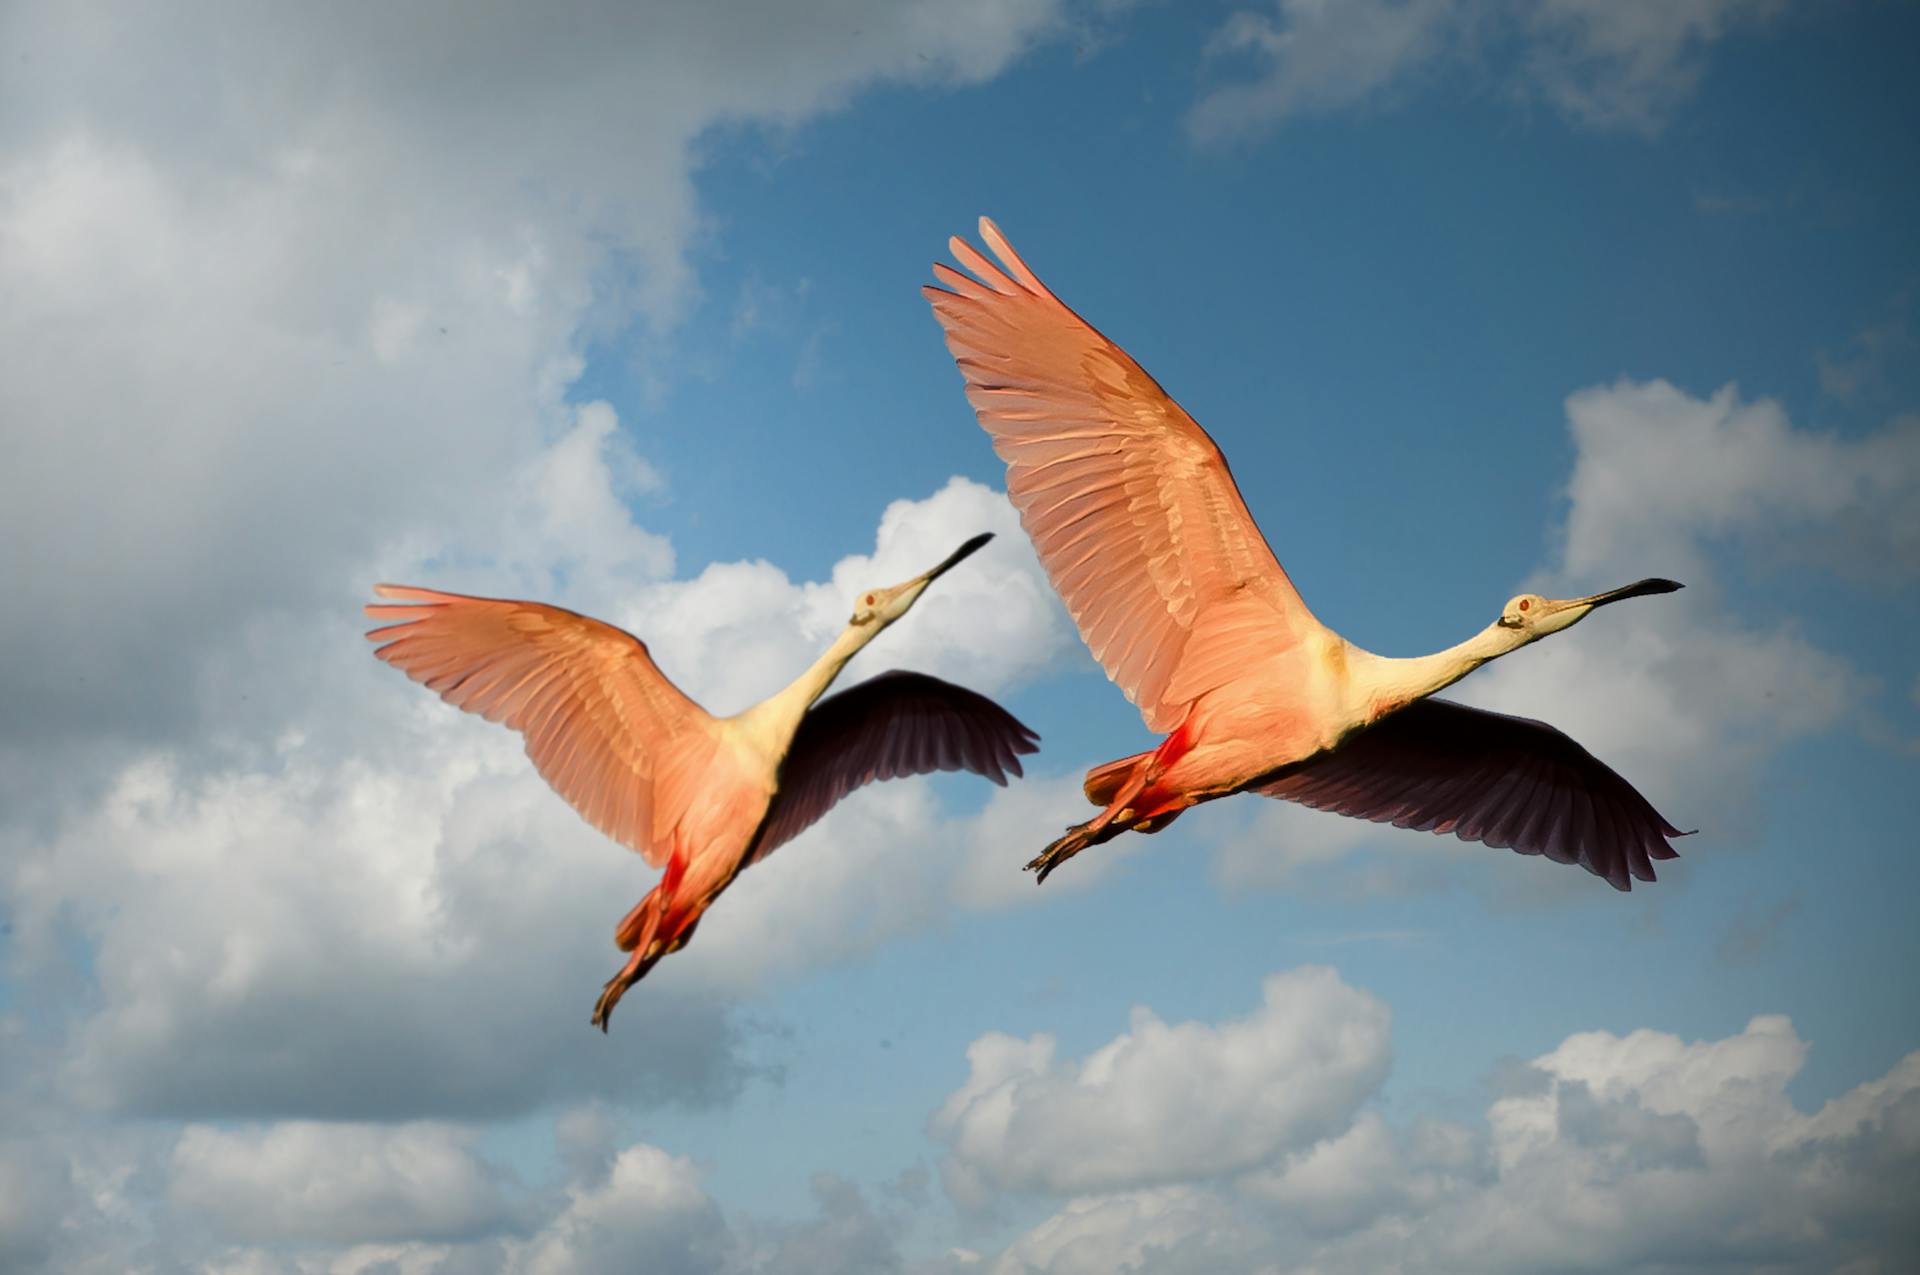 Low Angle Photography of Two Roseate Spoonbill Flying Under the Blue Sky